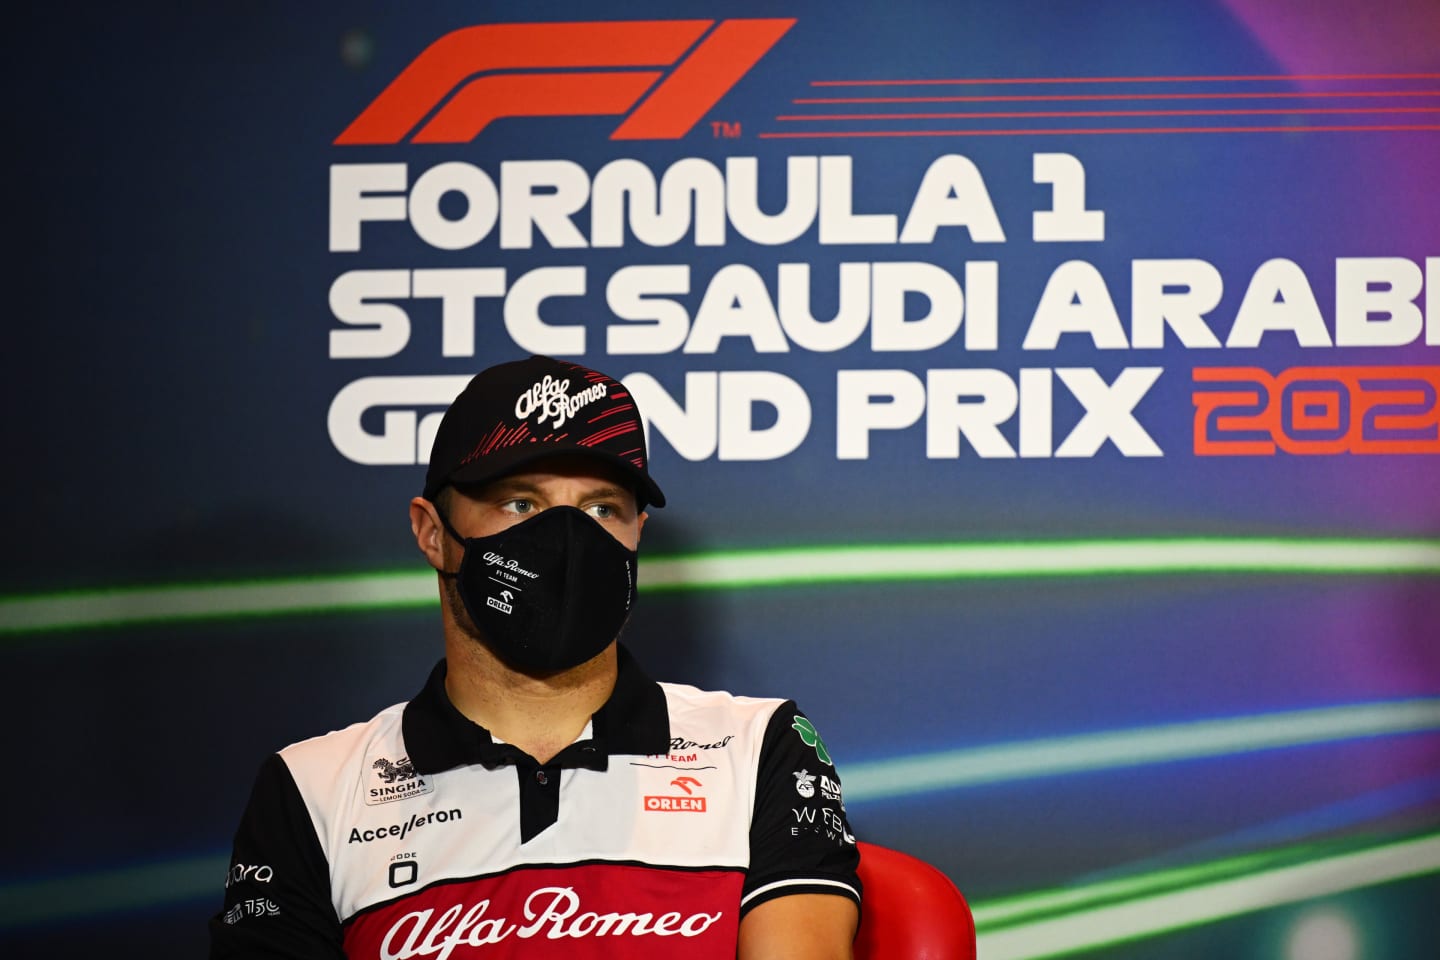 JEDDAH, SAUDI ARABIA - MARCH 25: Valtteri Bottas of Finland and Alfa Romeo F1 looks on in the Drivers Press Conference before practice ahead of the F1 Grand Prix of Saudi Arabia at the Jeddah Corniche Circuit on March 25, 2022 in Jeddah, Saudi Arabia. (Photo by Clive Mason/Getty Images)